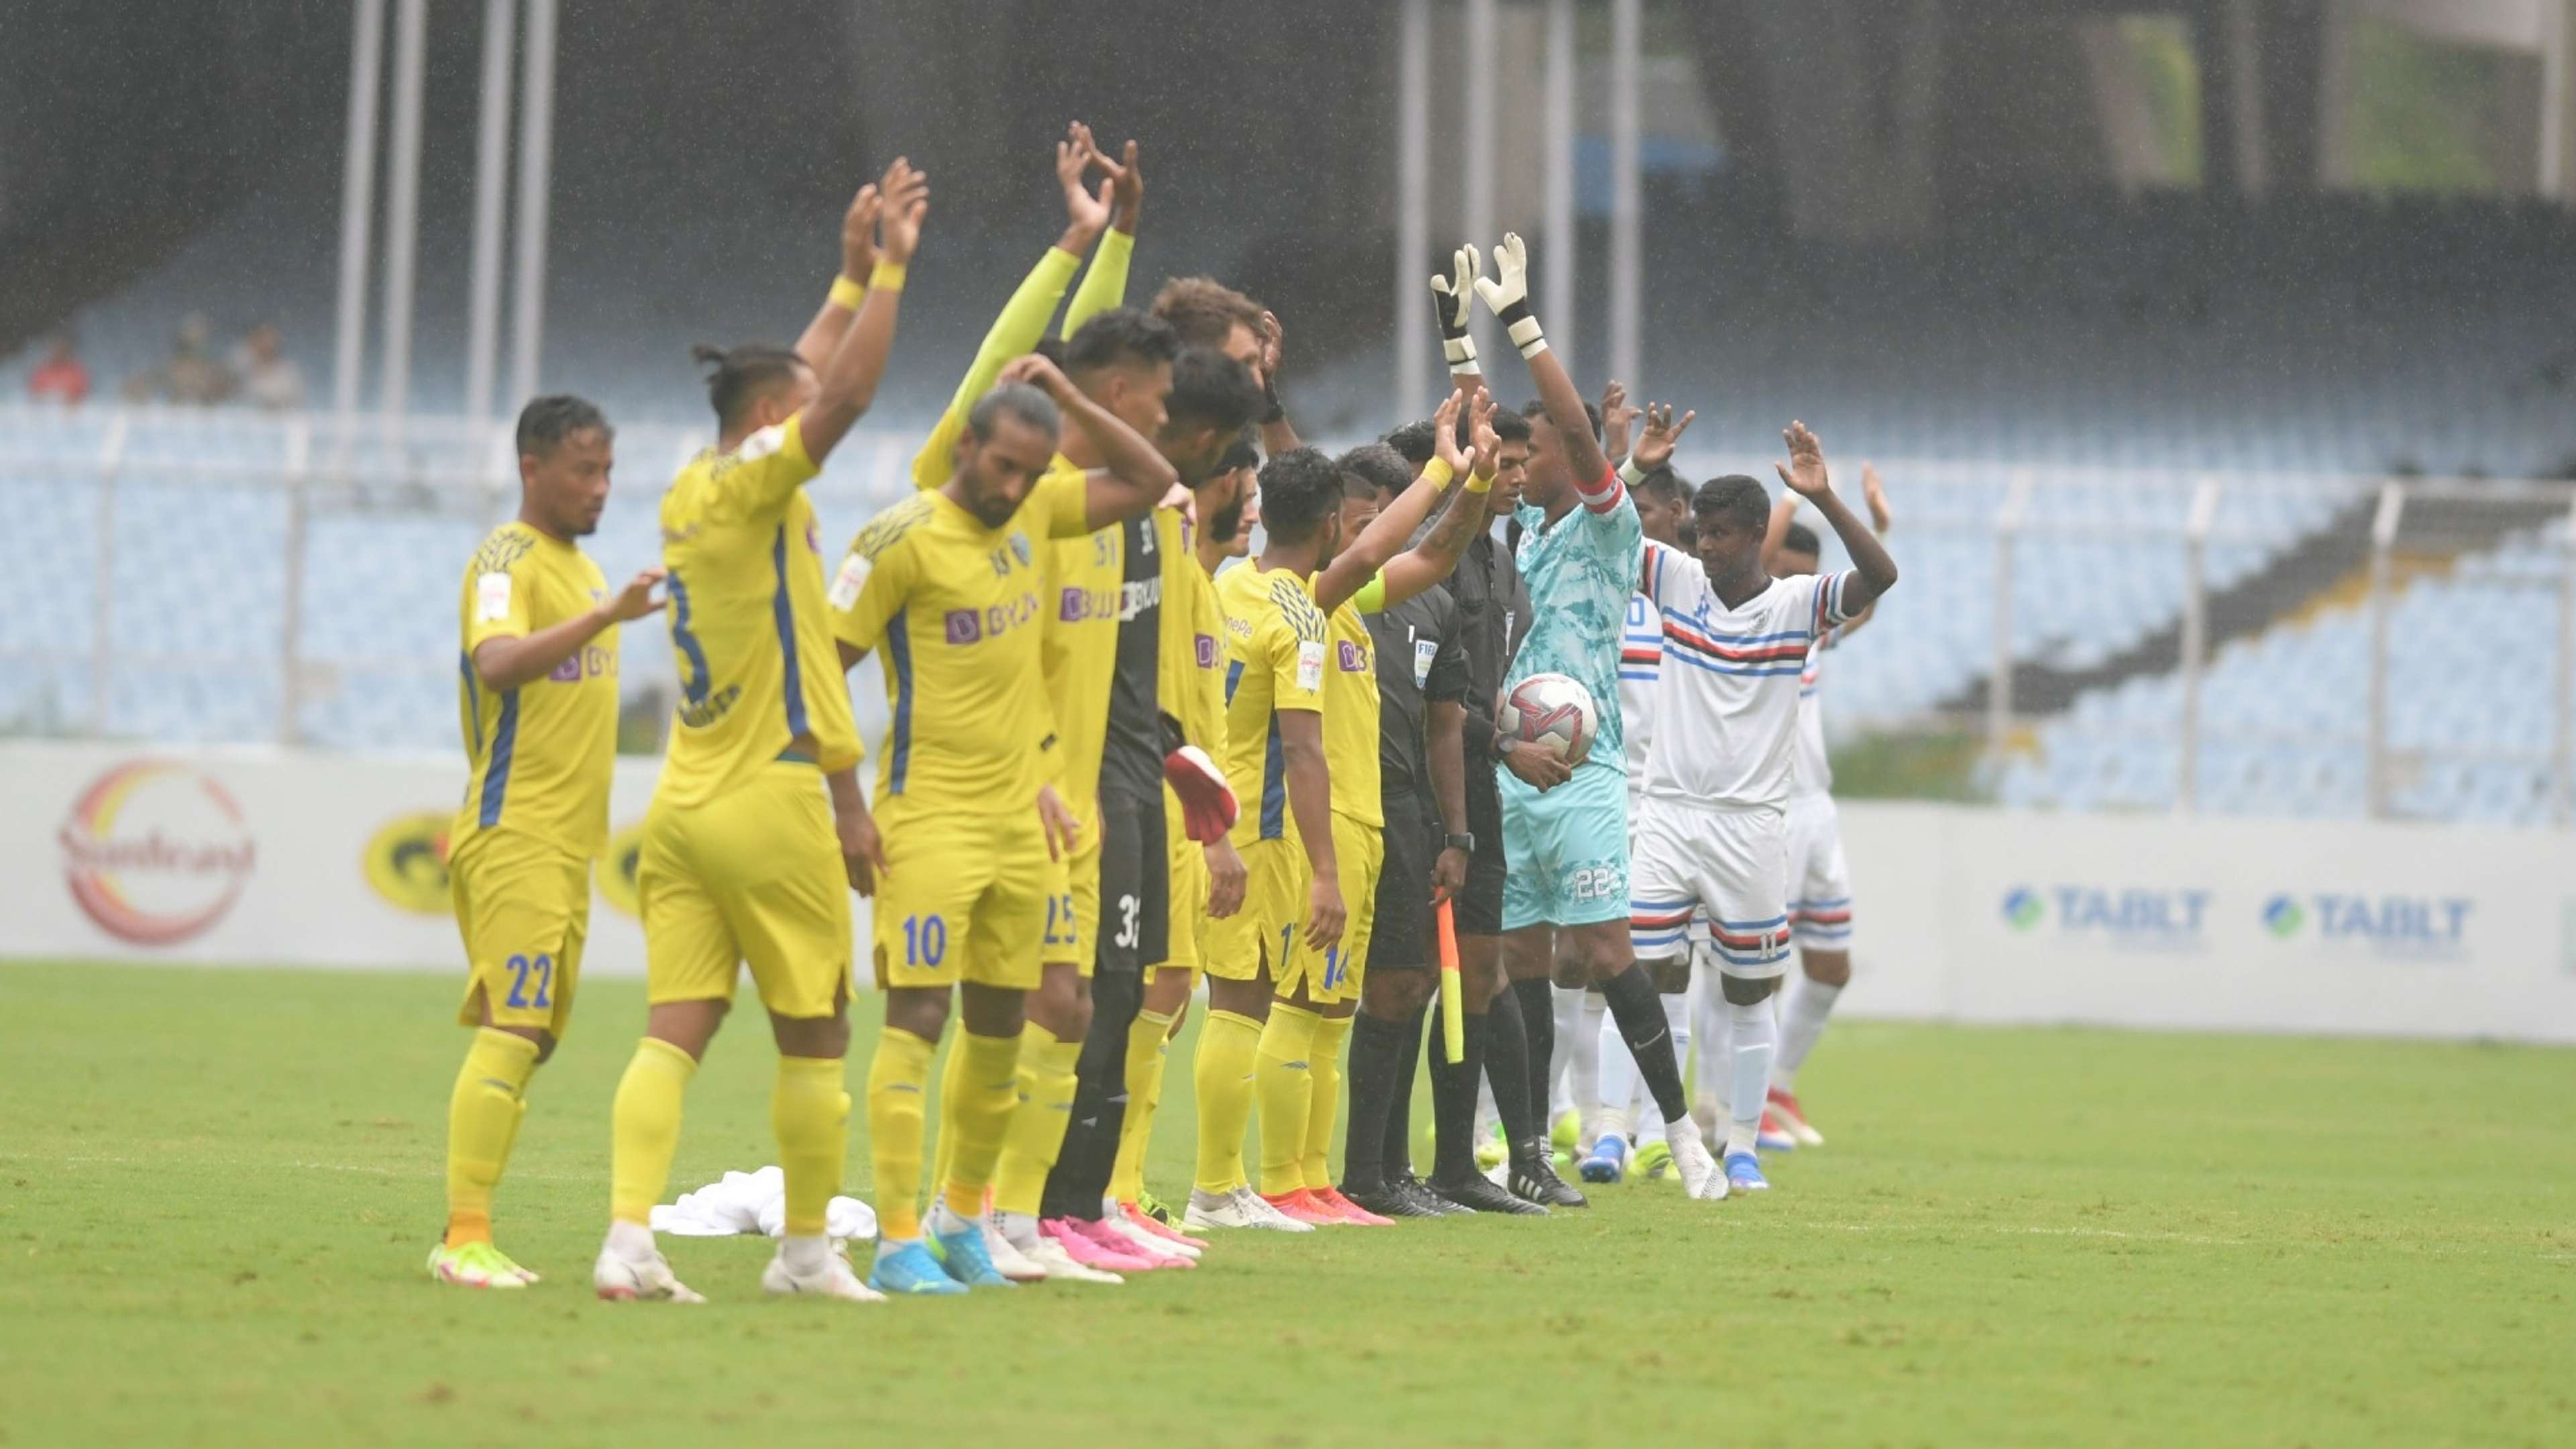 Kerala Blasters Indian Navy Durand Cup 2021